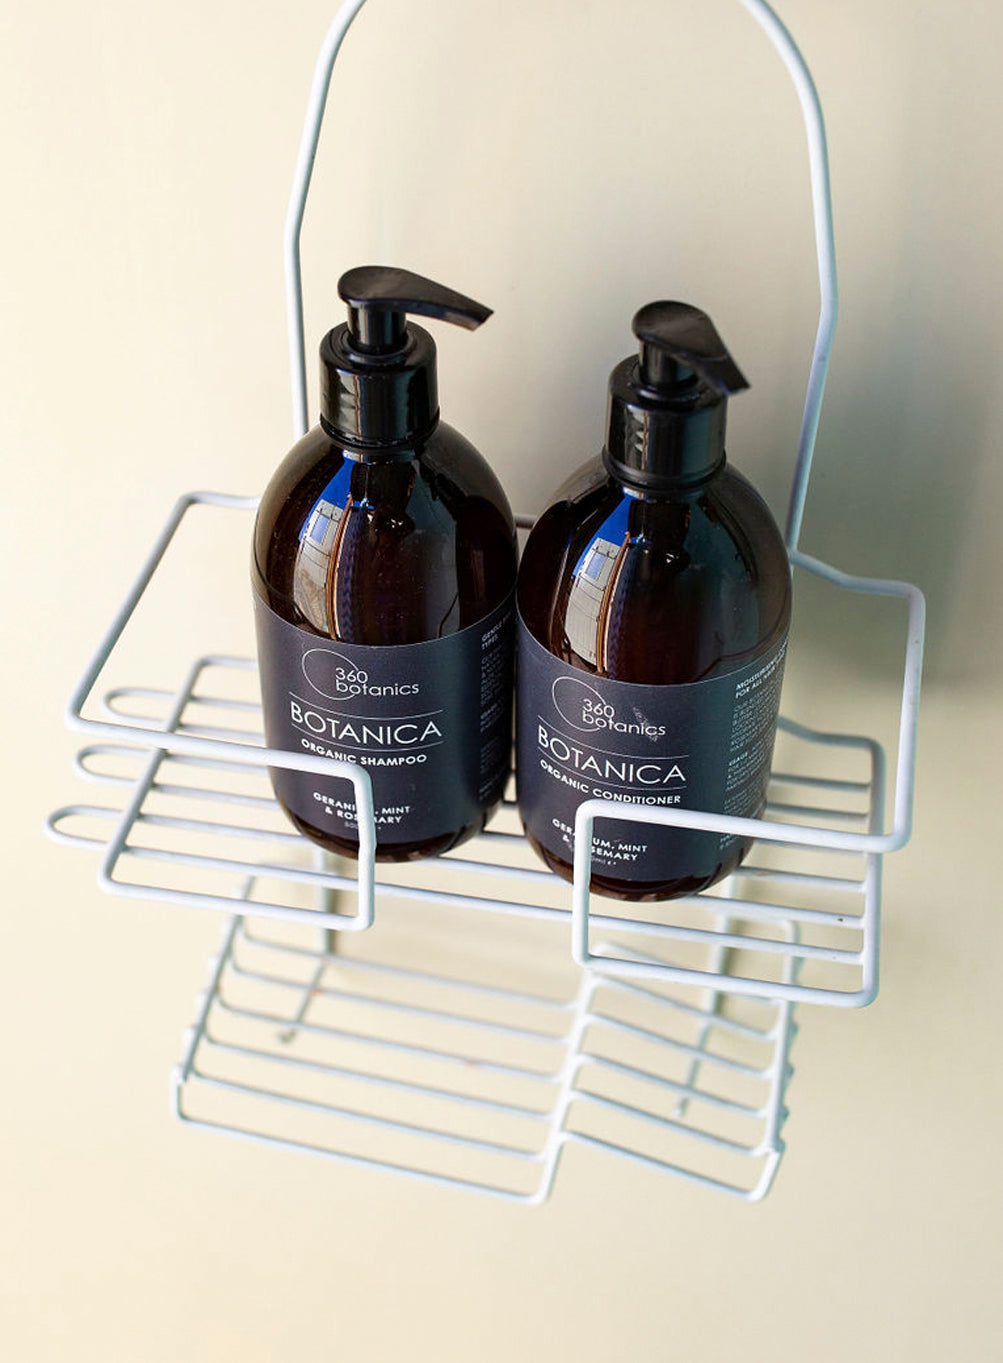 Two bottles of 360 Botanics Botanica products on a wire shelf: one is an organic shampoo and the other an organic conditioner, both featuring eucalyptus, mint, and rosemary, placed against a light-colored wall.